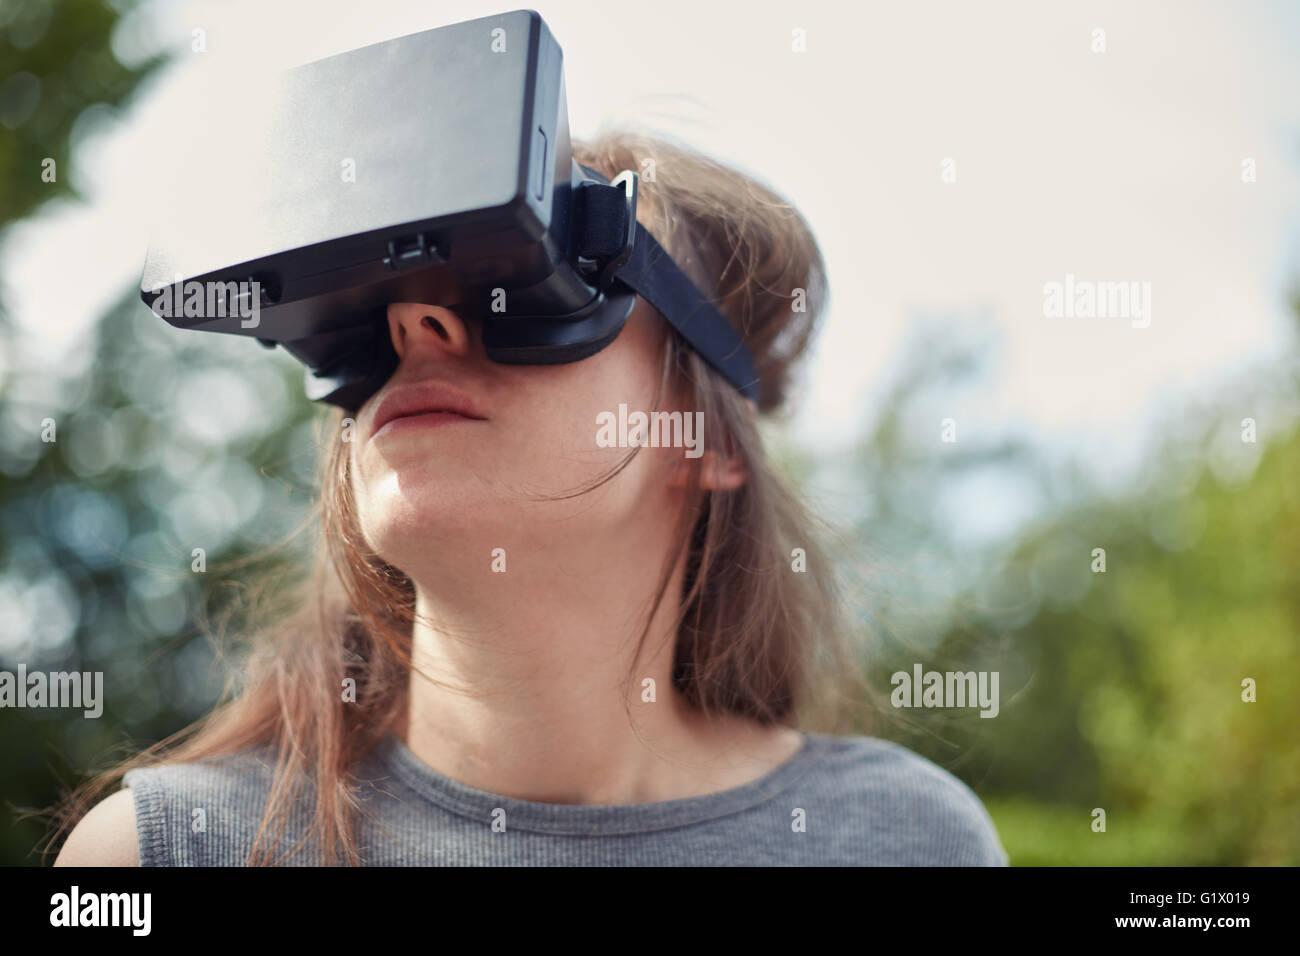 Young woman using a virtual reality headset Stock Photo